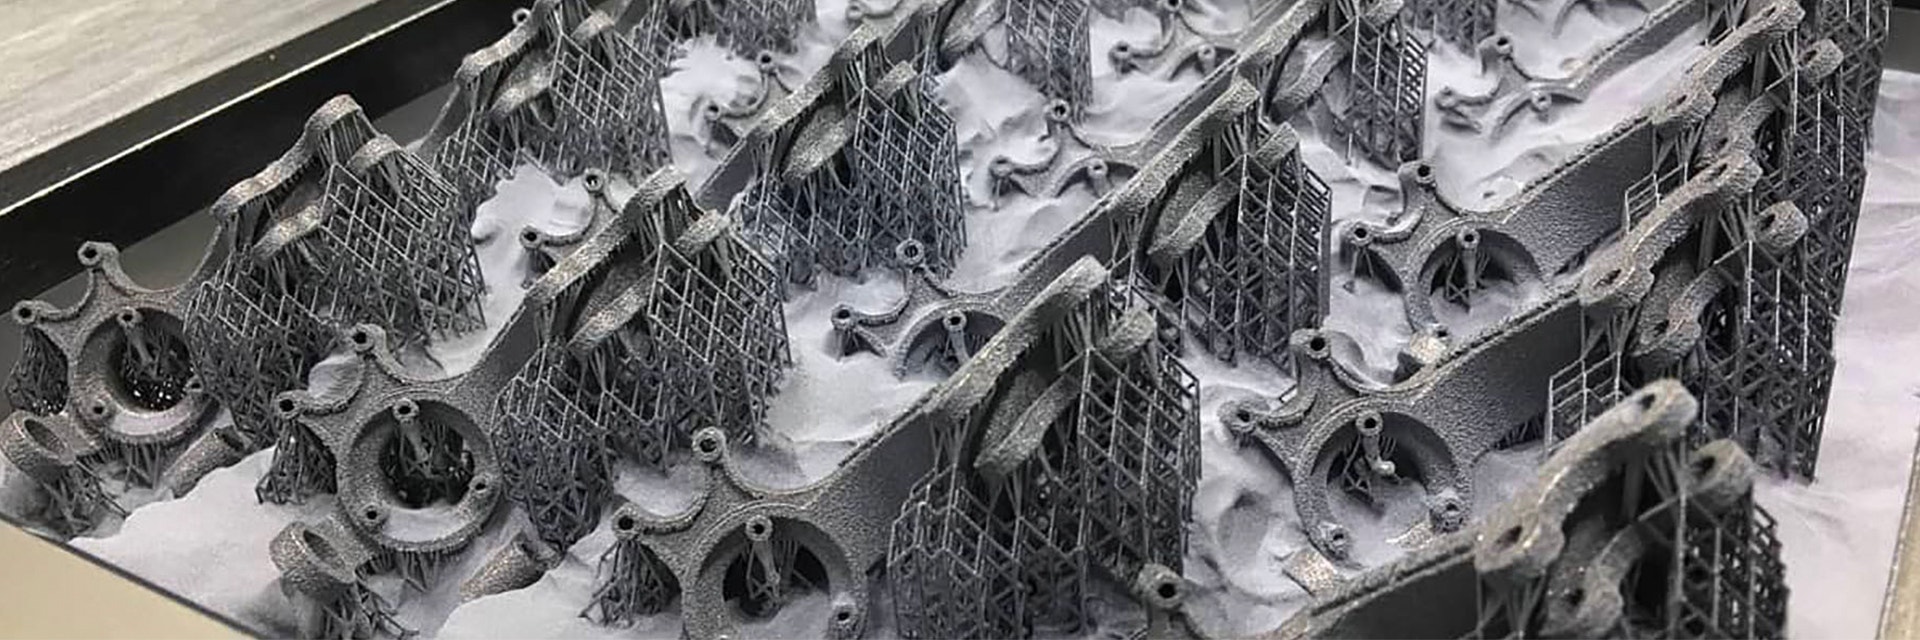 3D-printed metal parts with support structures, surrounded by loose powder